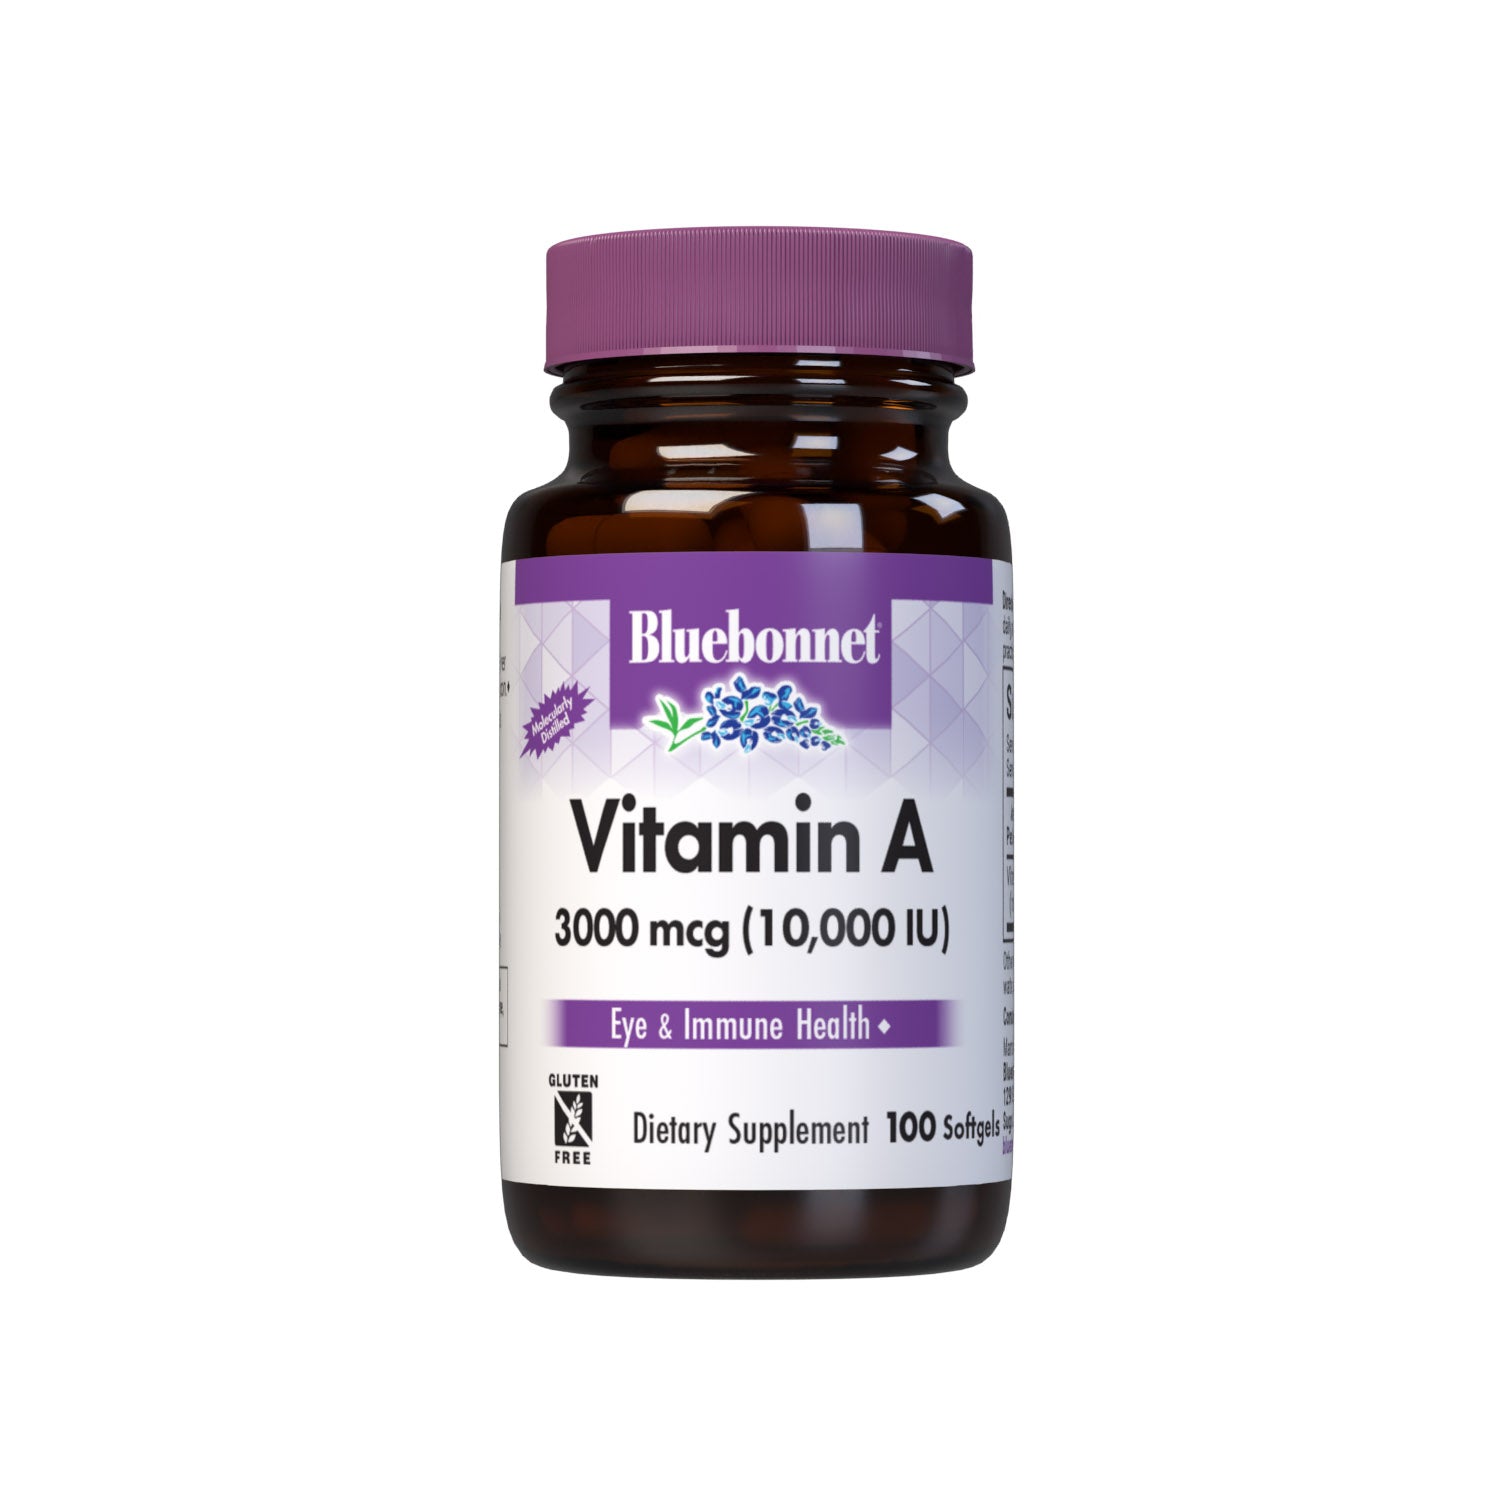 Bluebonnet’s Vitamin A 3000 mcg (10,000 IU) 100 Softgels are formulated with vitamin A that supports eye health and immune function, and is derived from deep sea, cold water, fish liver oil and are molecularly distilled. #size_100 count